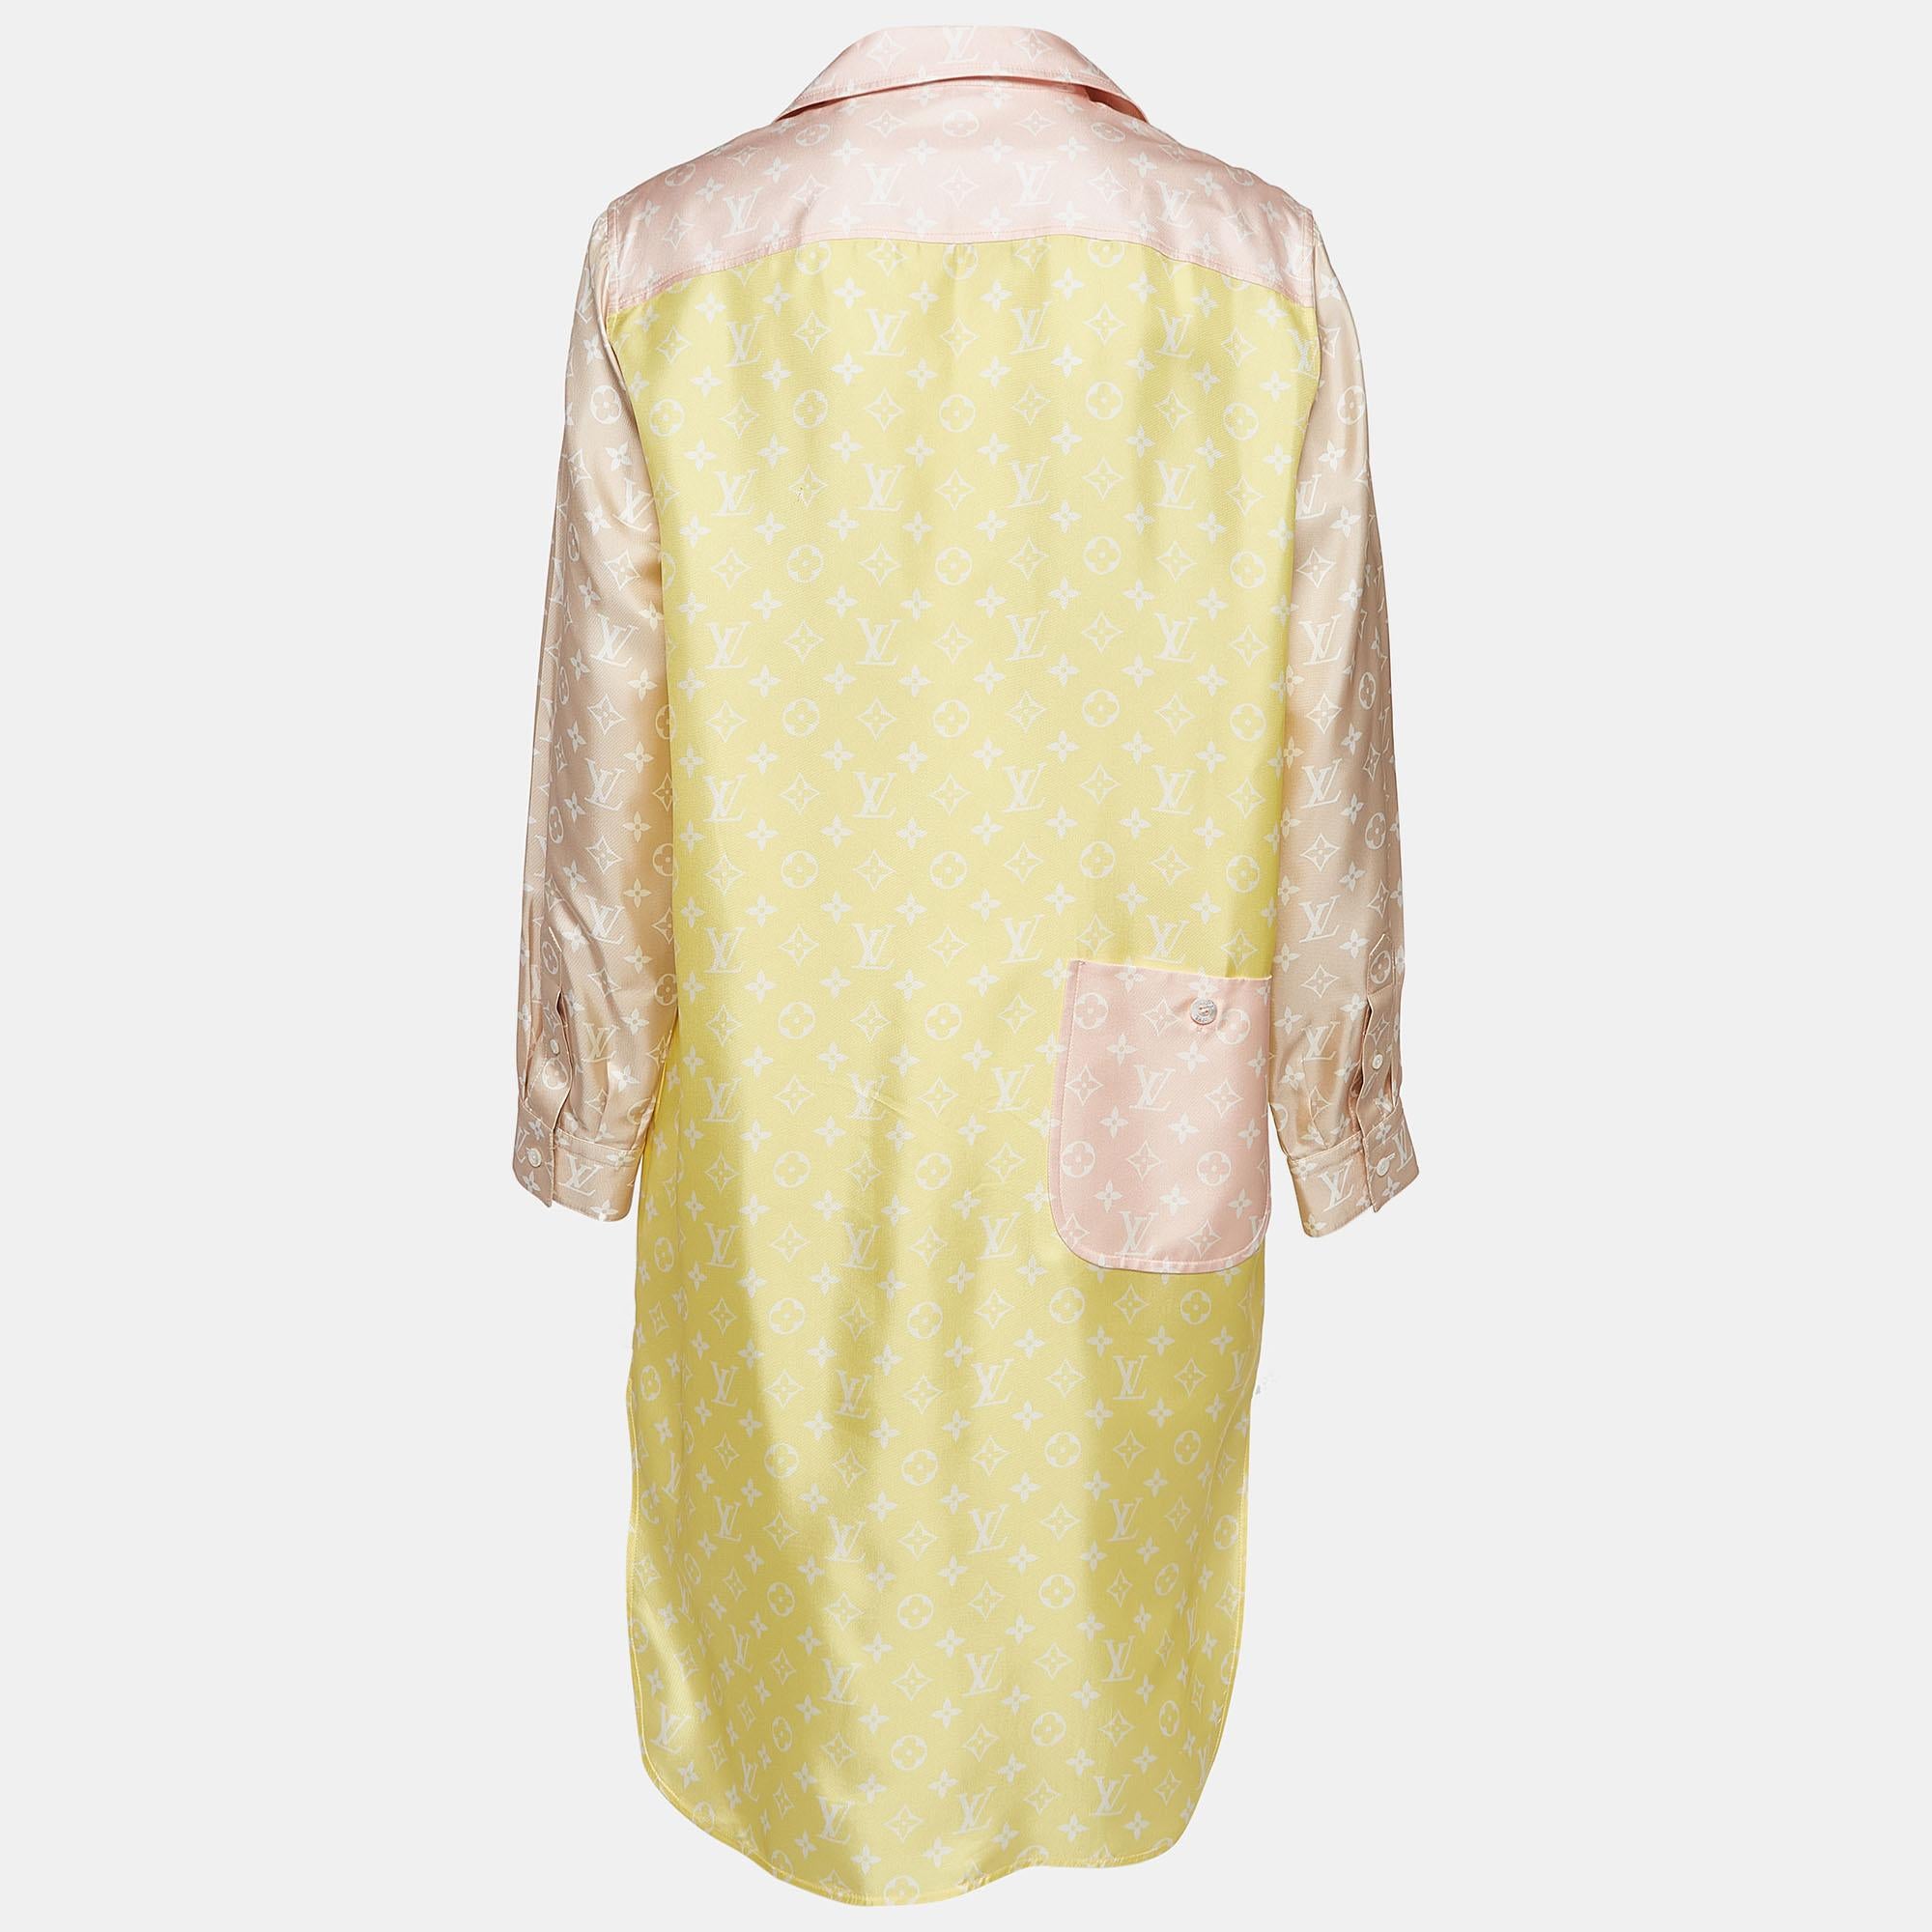 Introducing the Louis Vuitton dress, a captivating fusion of luxury and playfulness. Crafted from sumptuous silk, its pastel yellow hue exudes warmth and vitality. The iconic LV monogram pattern adds a touch of timeless charm, while the high-low